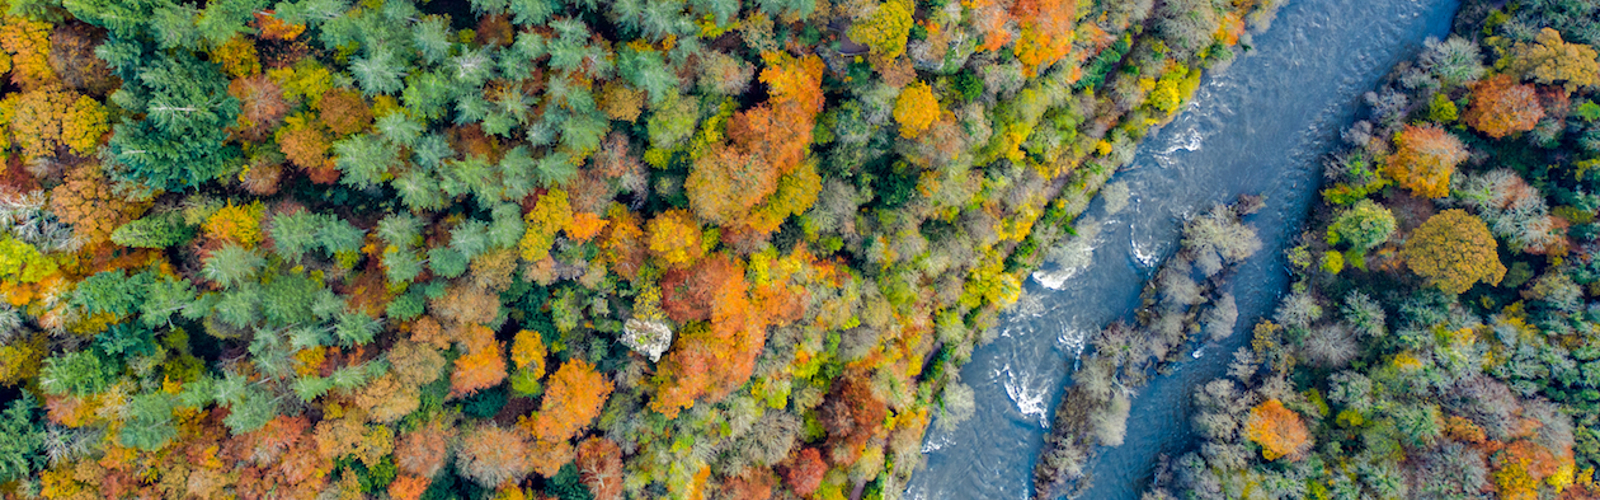 Aerial view of the autumn leaves and colours at River Wye, Symonds Yat, Herefordshire, Midlands, England, UK